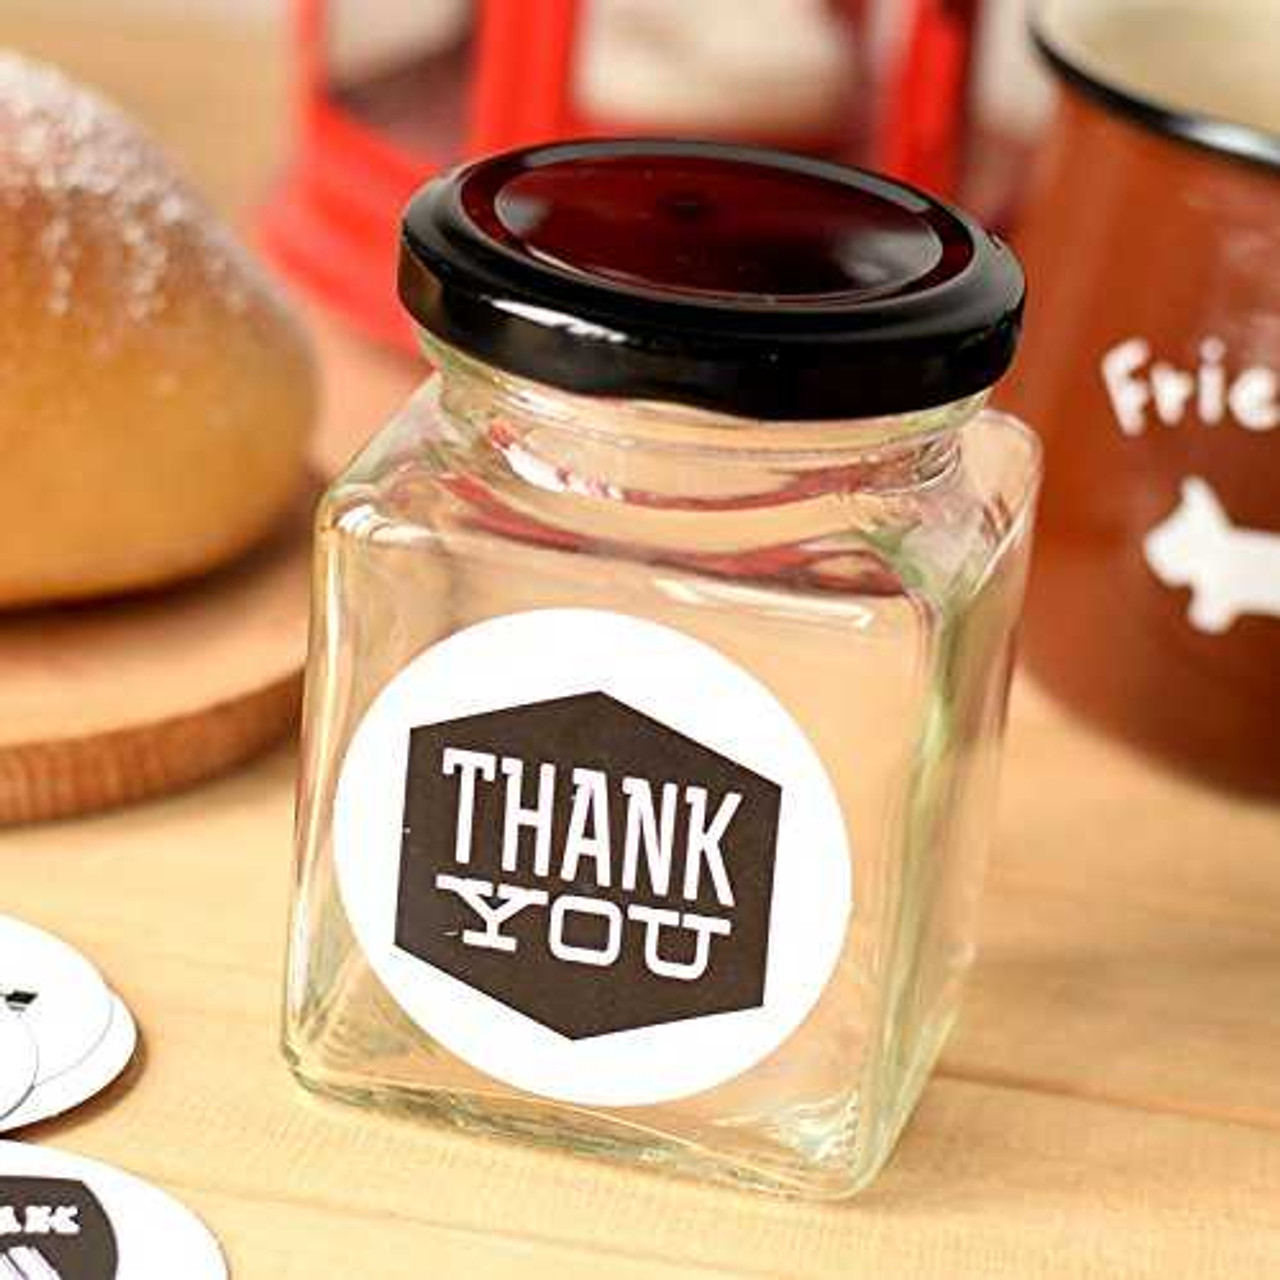 https://cdn11.bigcommerce.com/s-1ybtx/images/stencil/1280x1280/products/1269/6685/4-oz-Cube-Square-Glass-Jars-with-Lid-Made-in-Europe_4208__08618.1674335842.jpg?c=2?imbypass=on